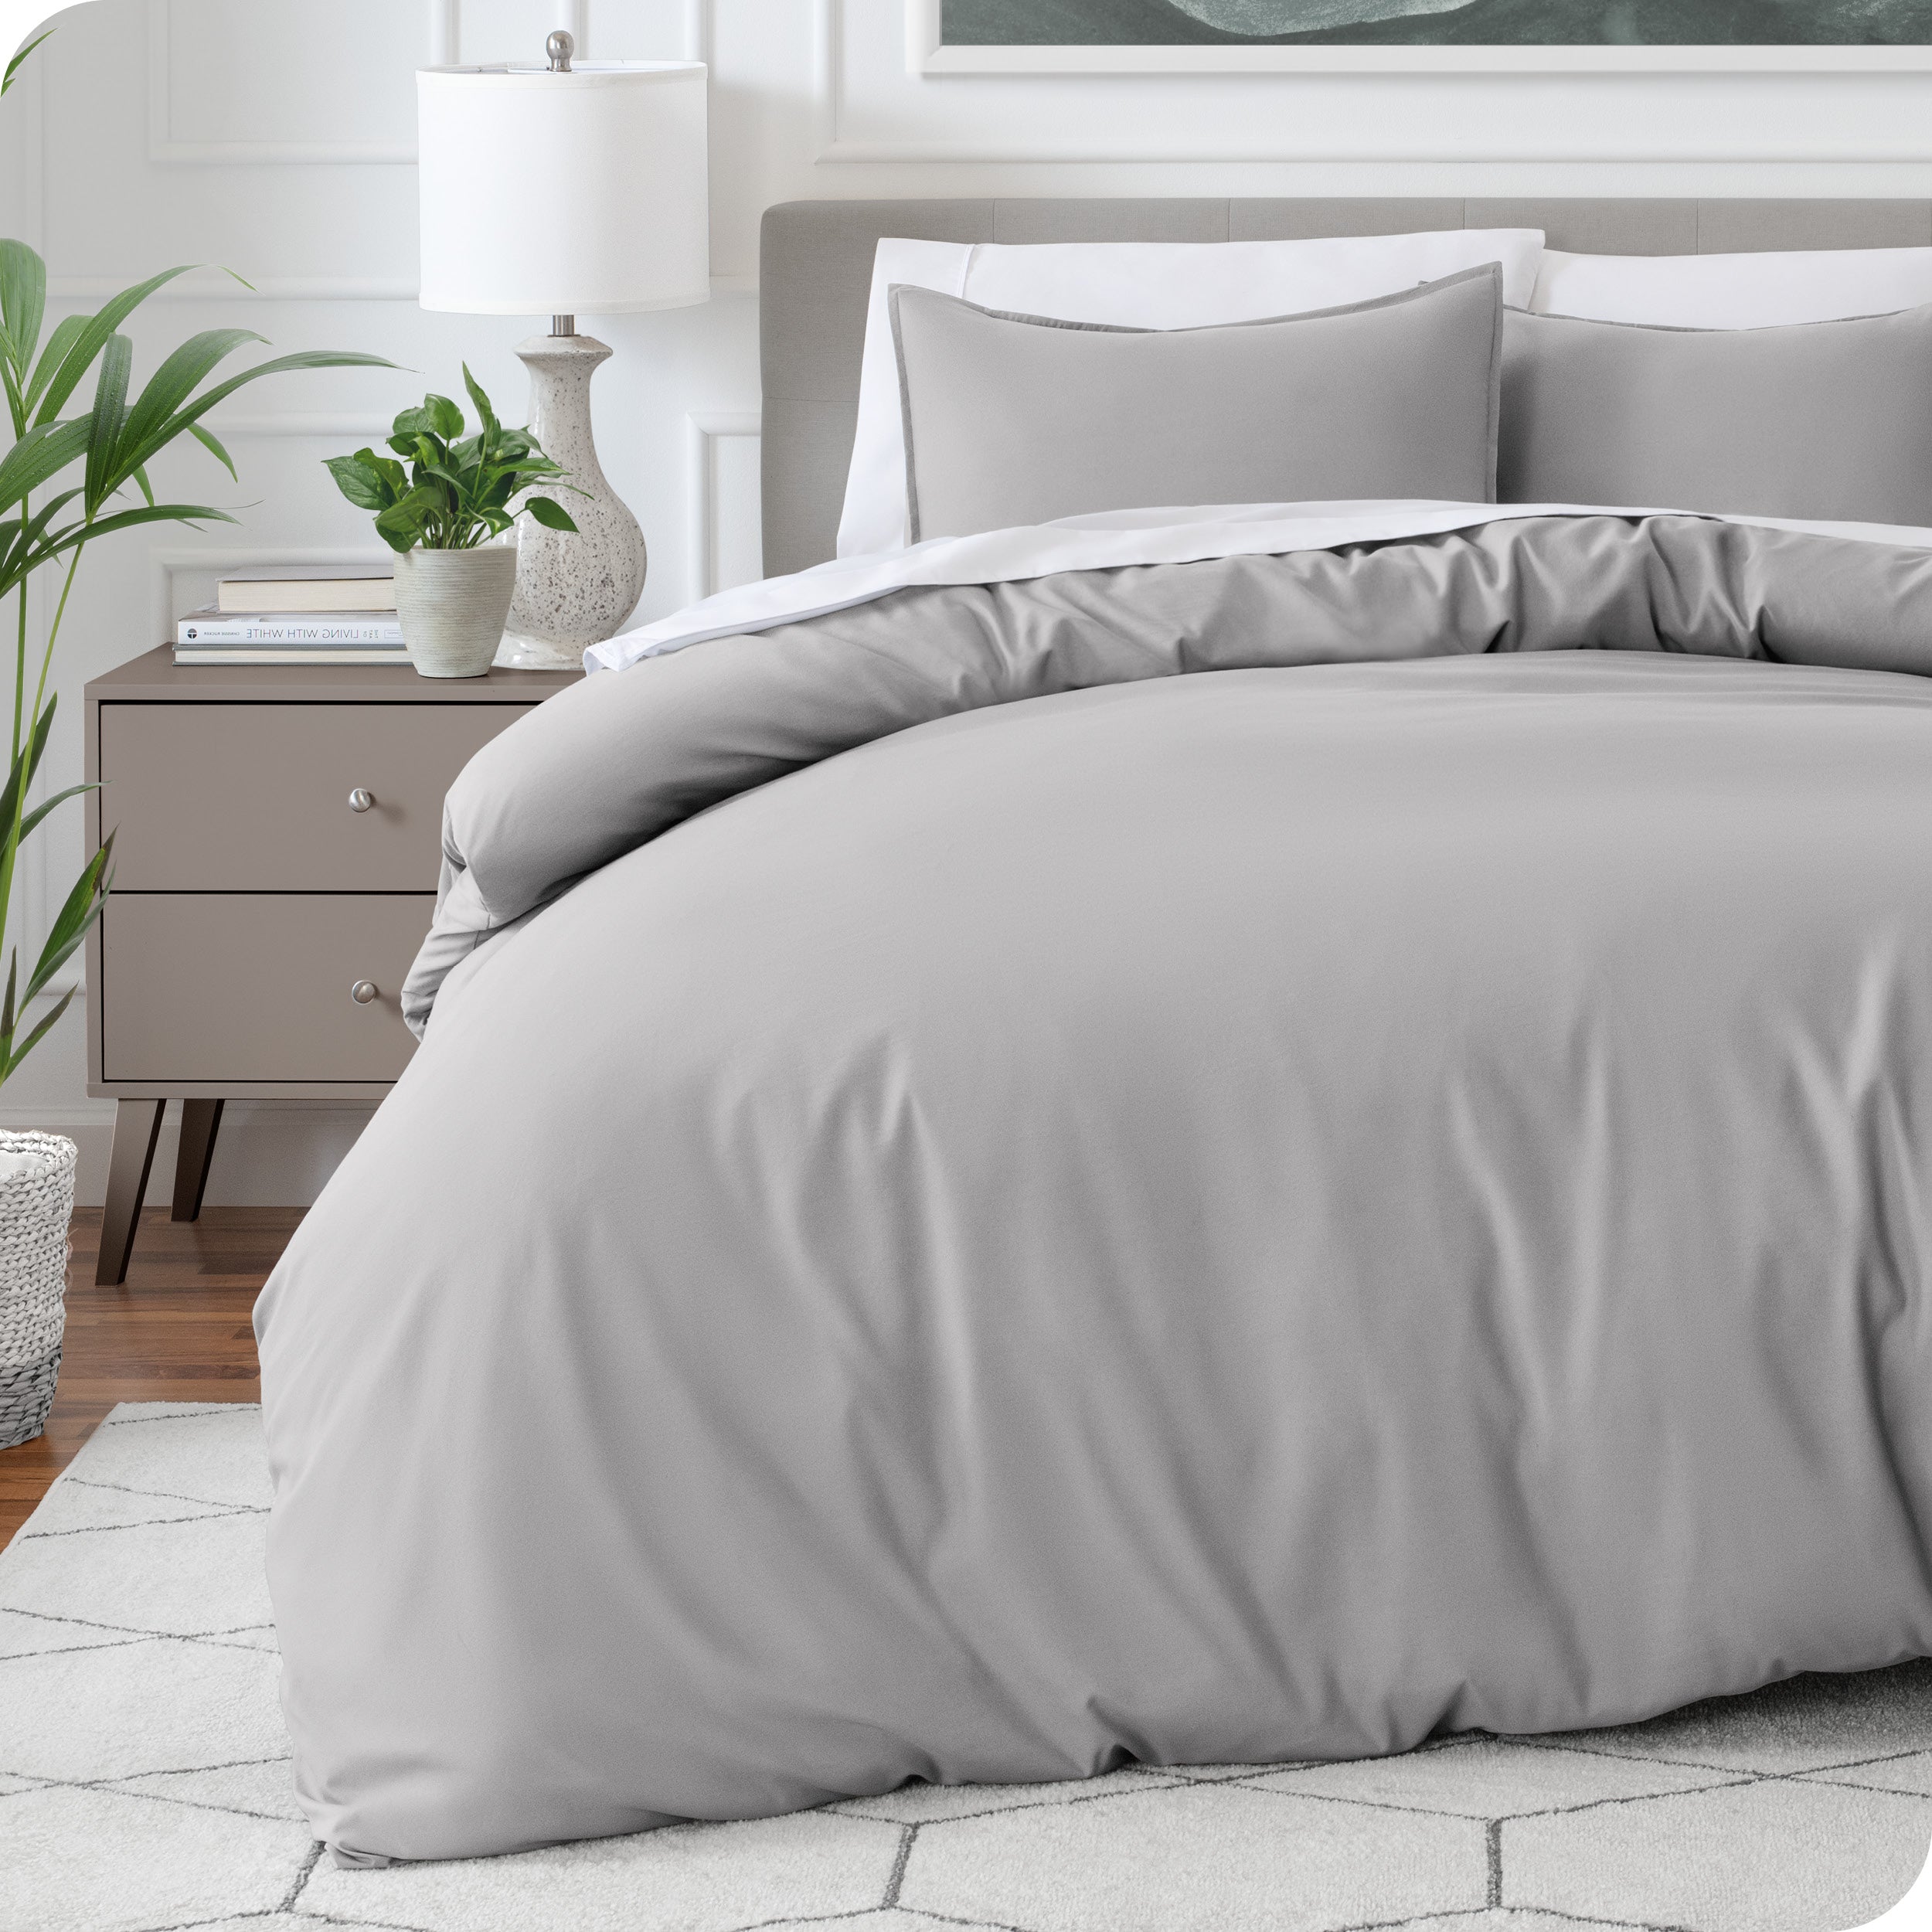 Modern bedroom with a microfiber duvet cover on the bed